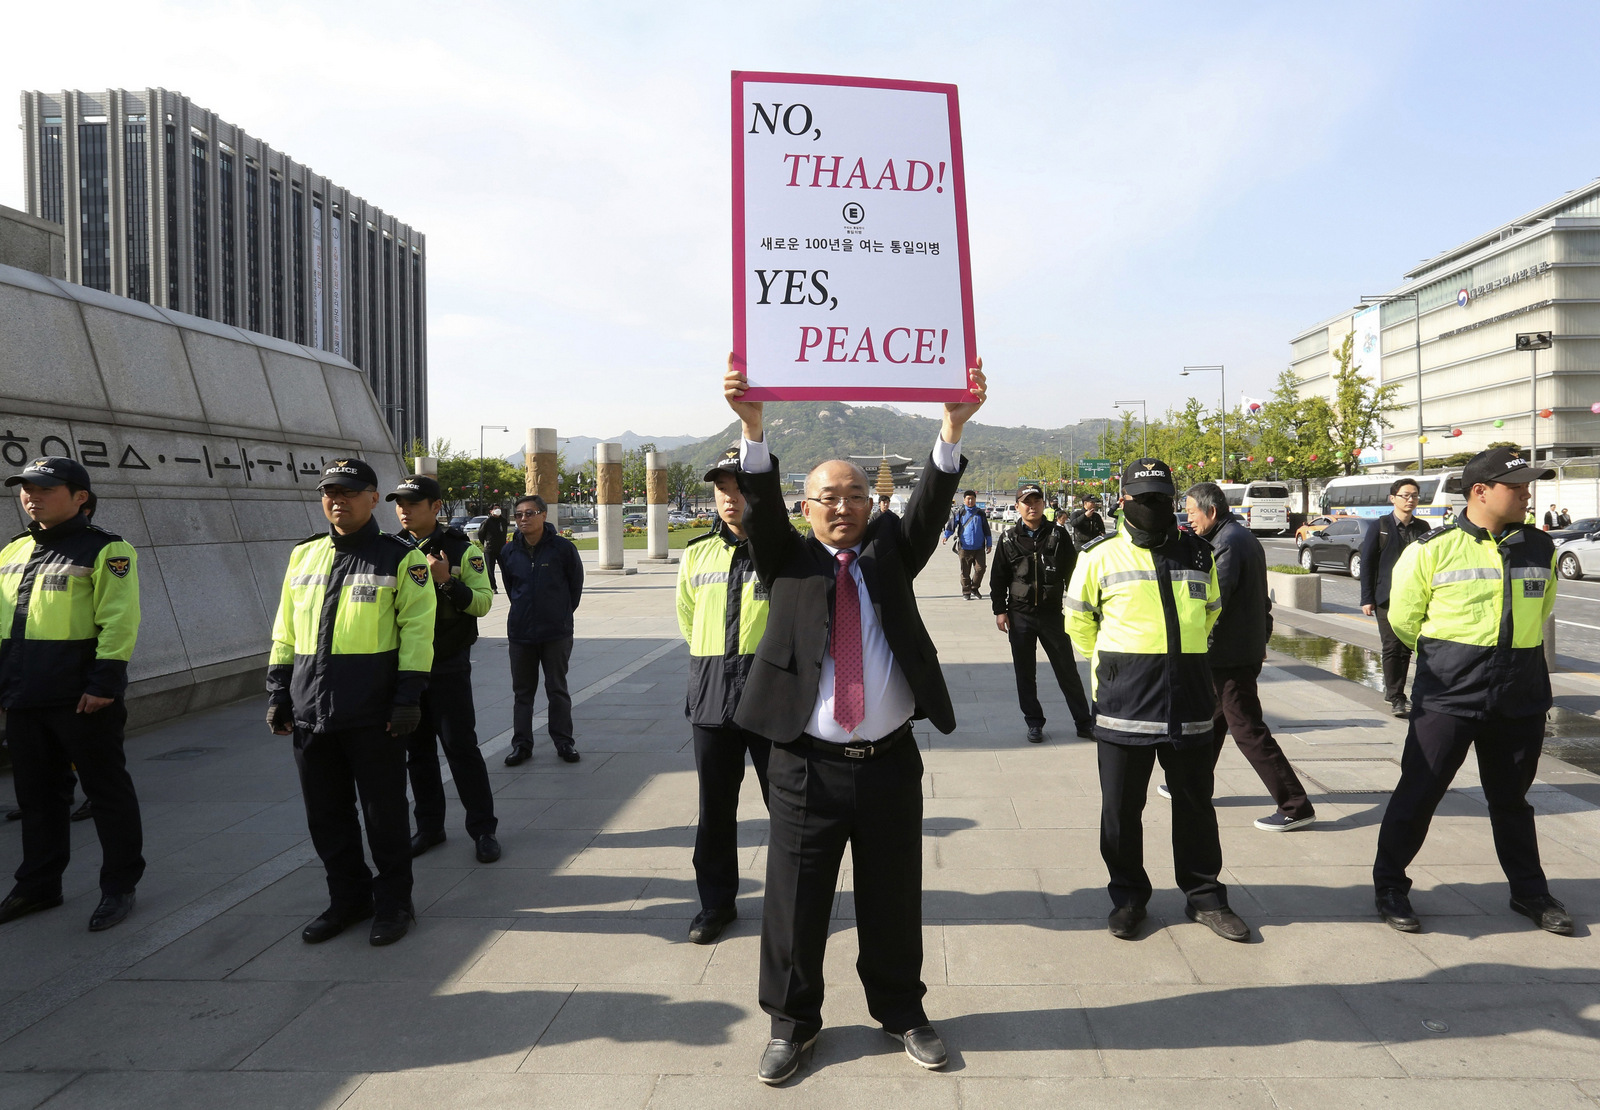 A South Korean protester holds up a placard opposing a plan to deploy the a U.S. missile defense system called Terminal High-Altitude Area Defense, or THAAD, near U.S. Embassy in Seoul, South Korea, April 27, 2017. (AP/Ahn Young-joon)